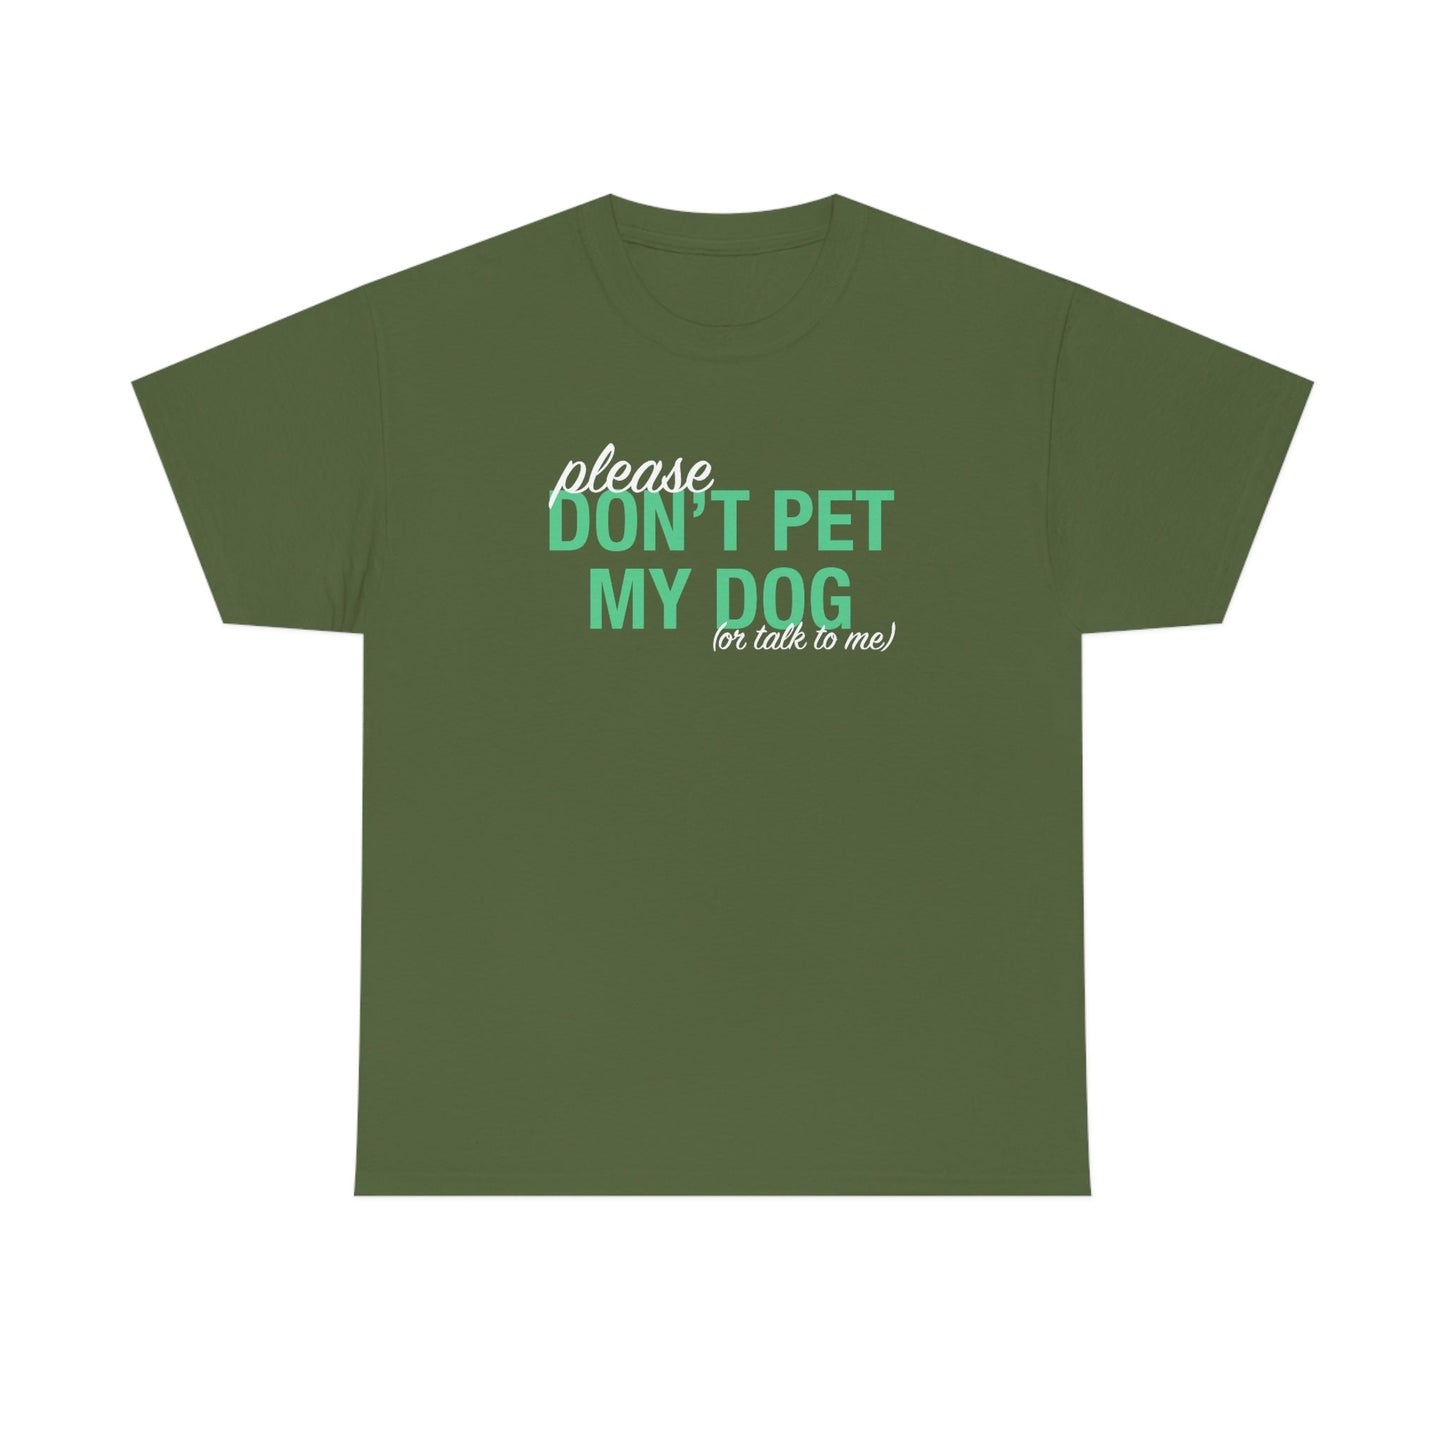 Please Don't Pet My Dog (Or Talk To Me) | Text Tees - Detezi Designs-92124148735388964175